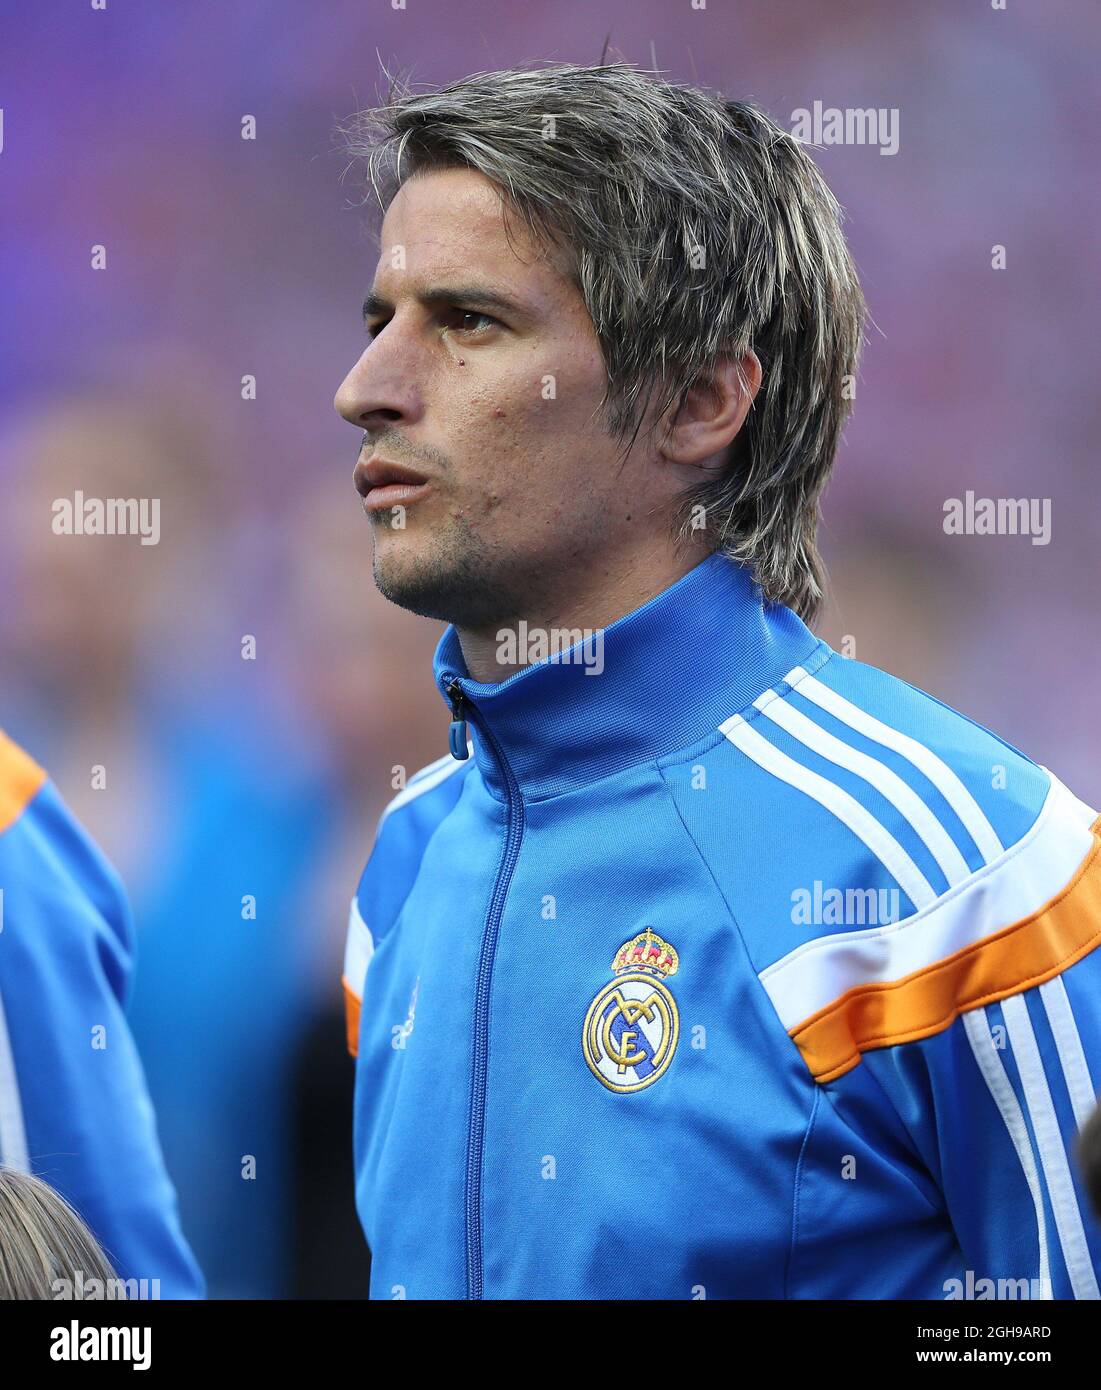 Real Madrid's Fabio Coentrao in action after the UEFA Champions League soccer final match between Real Madrid and Atletico Madrid at Estadio da Luz Stadium in Lisbon, Portugal on May 24, 2014. Pictured by David Klein/Sportimage. Stock Photo